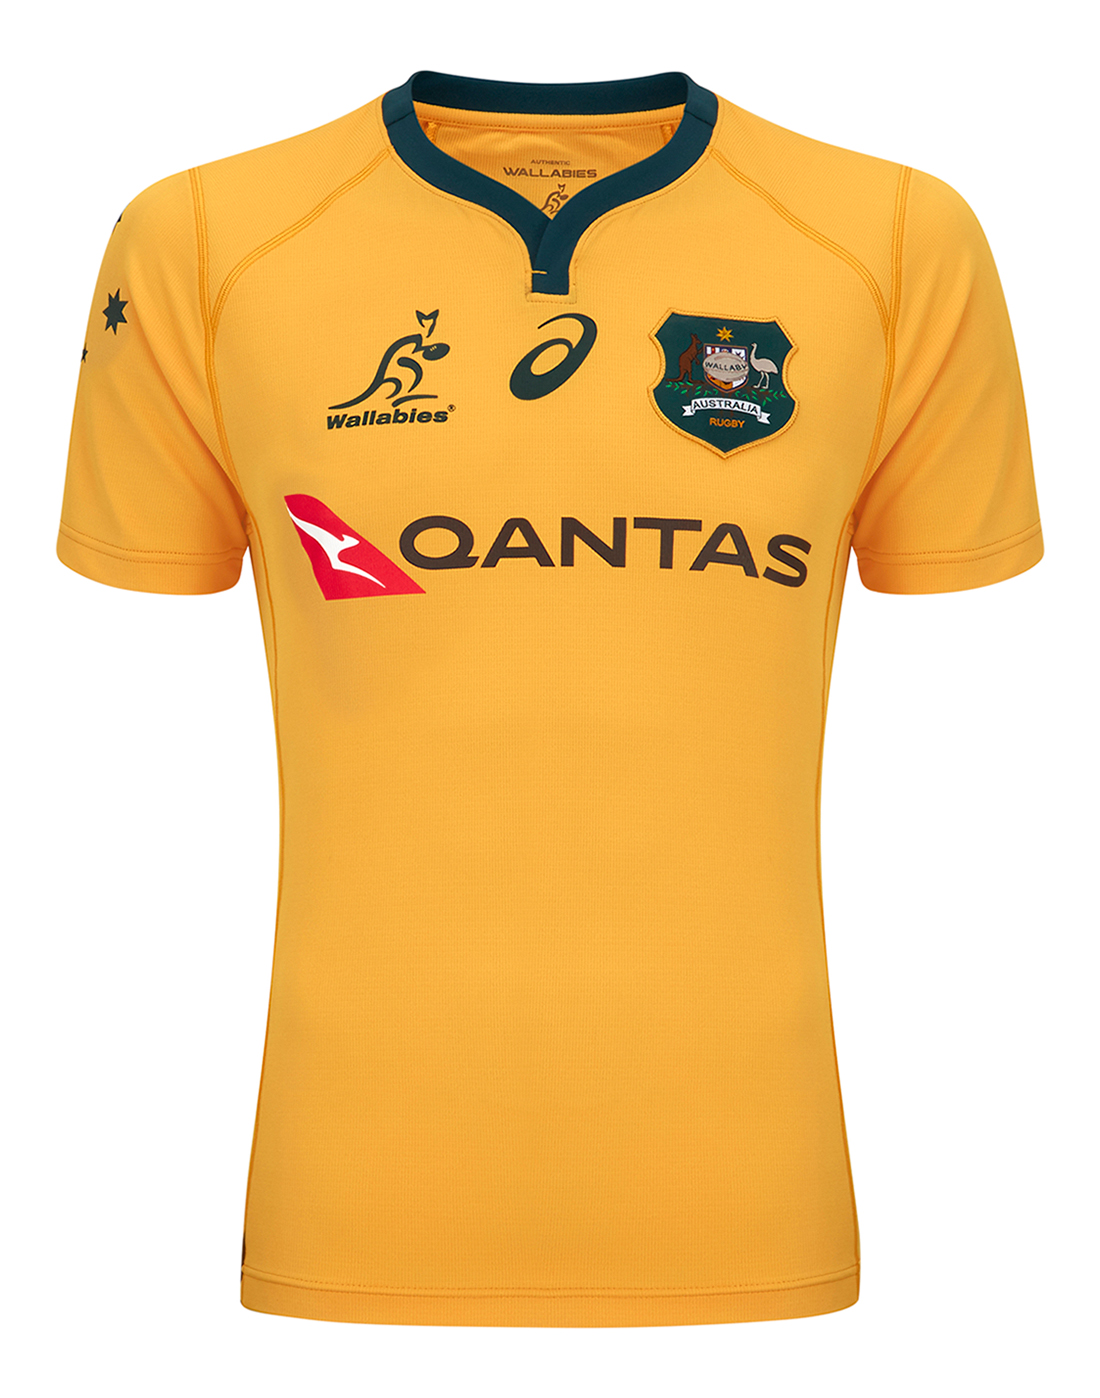 australian rugby tops